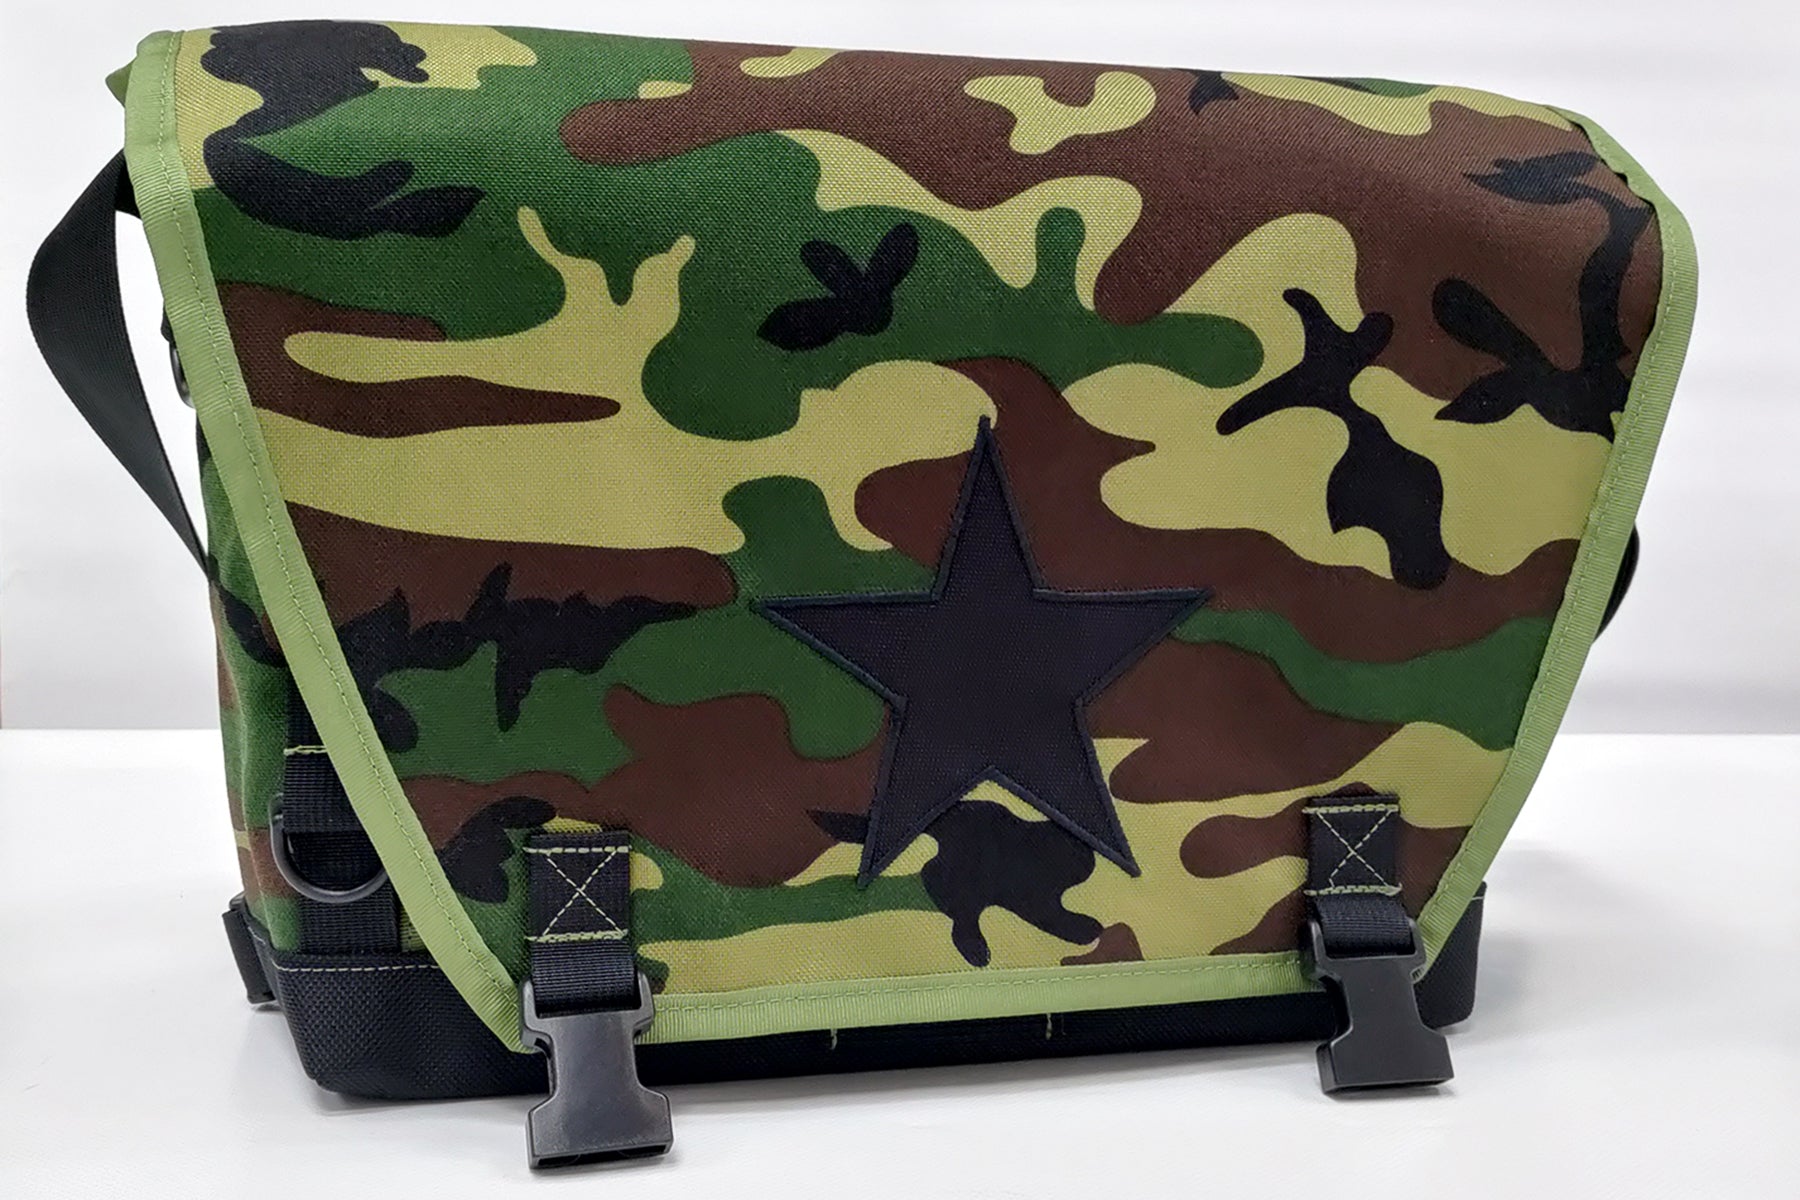 Small Messenger bag in Camo with white lining